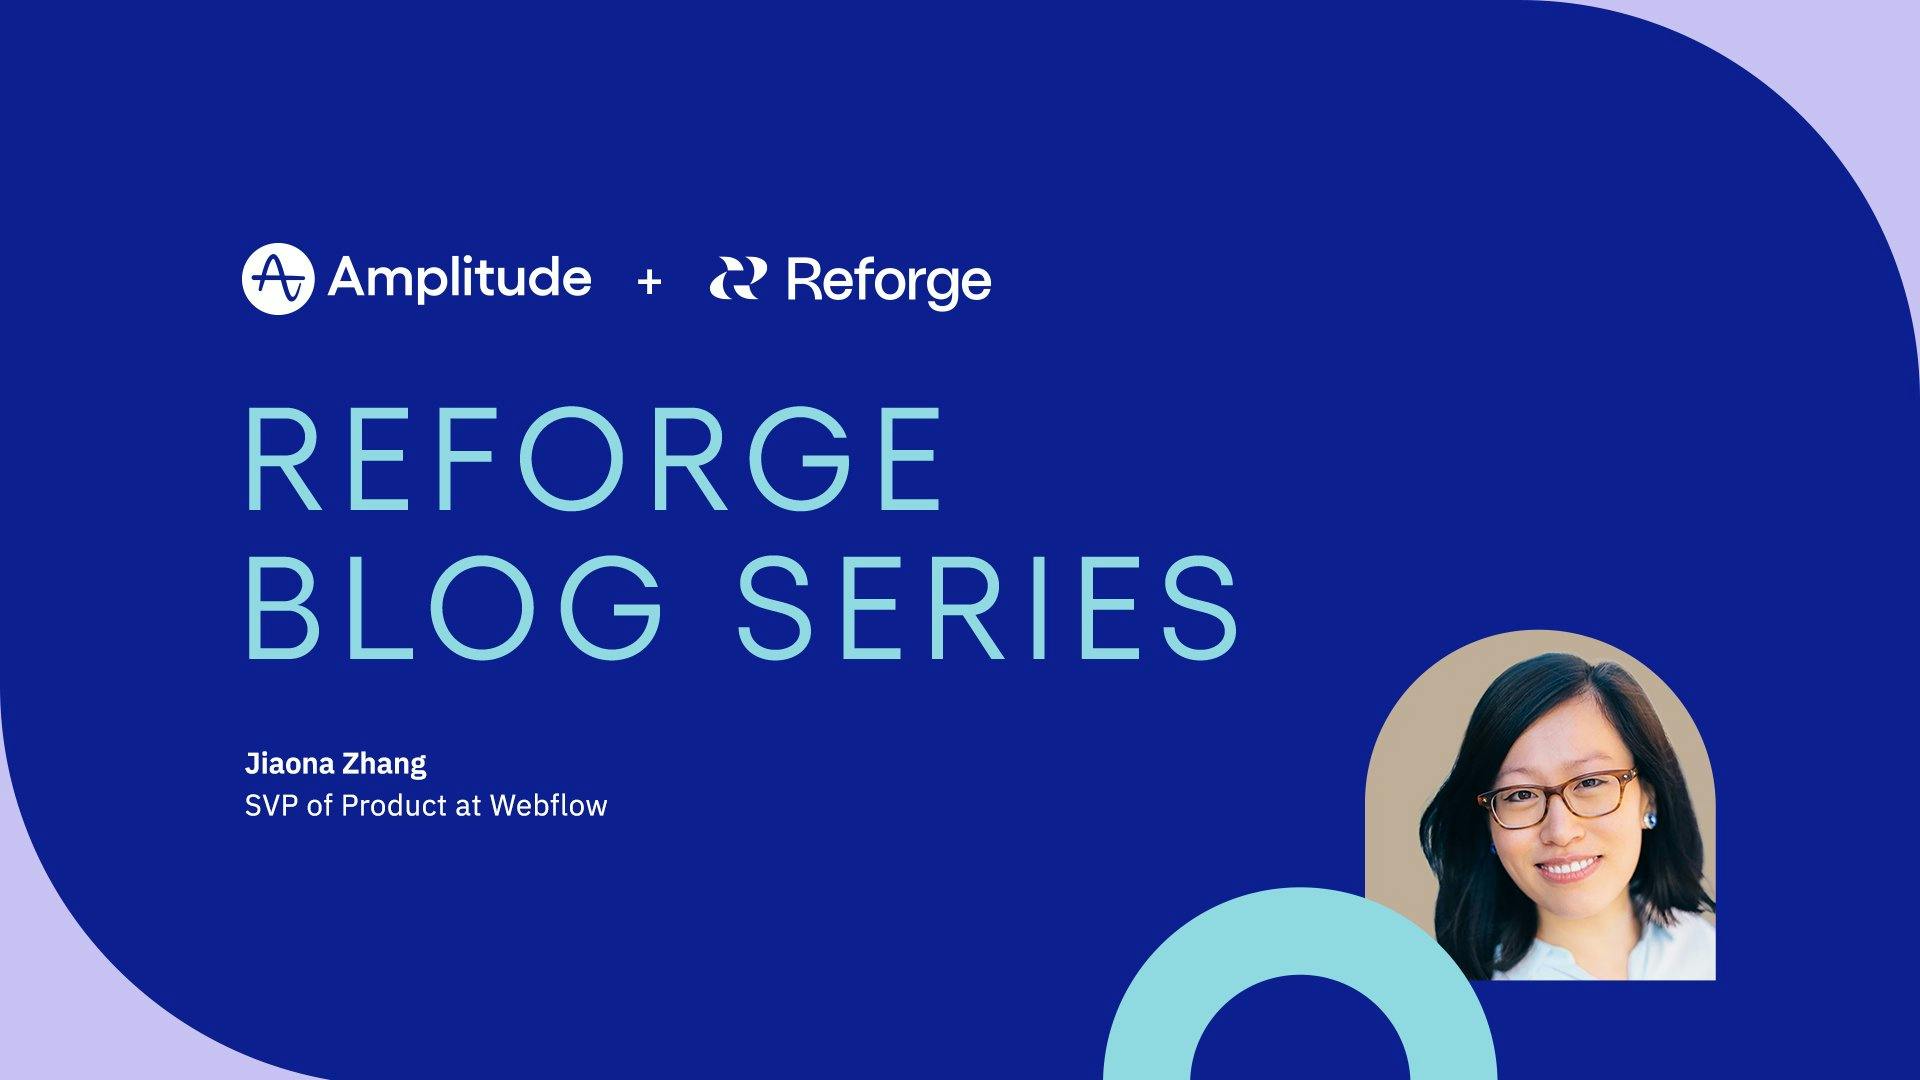 Reforge Blog Series blue, purple and teal header image in Amplitude branding with headshot featuring Jiaona Zhang